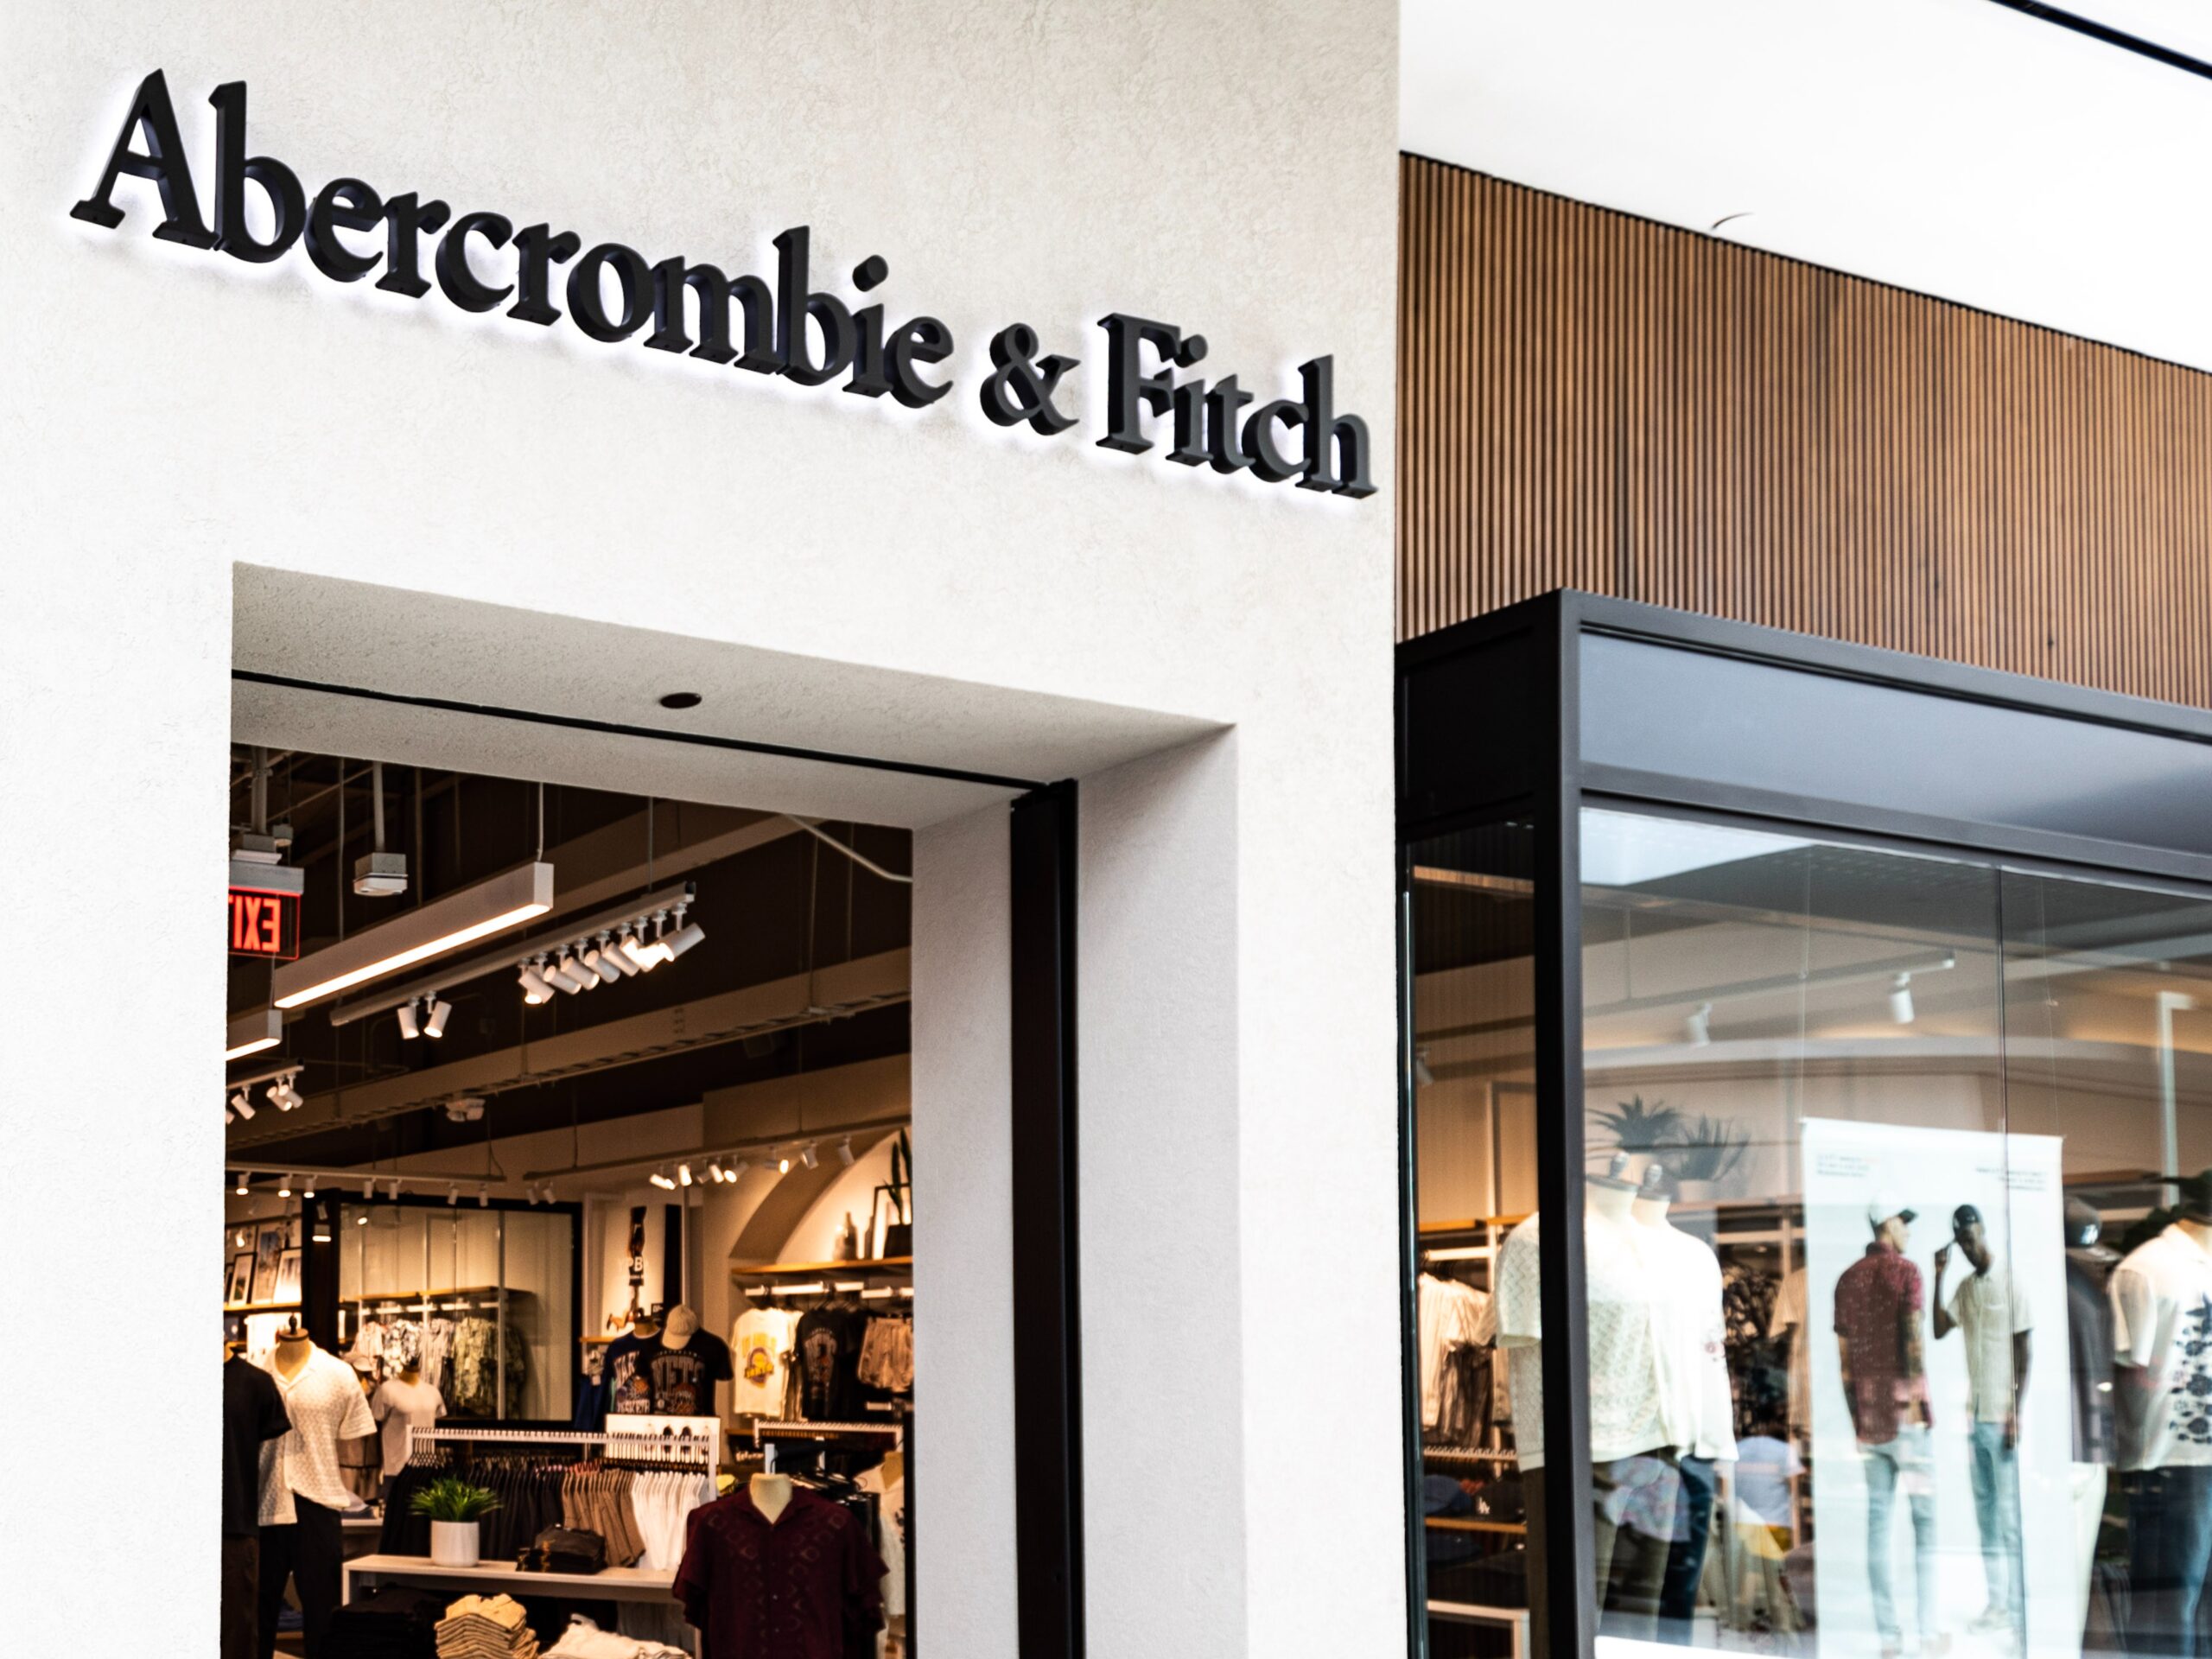 Abercrombie & Fitch opens investigation into allegations of sexual misconduct against the former CEO.